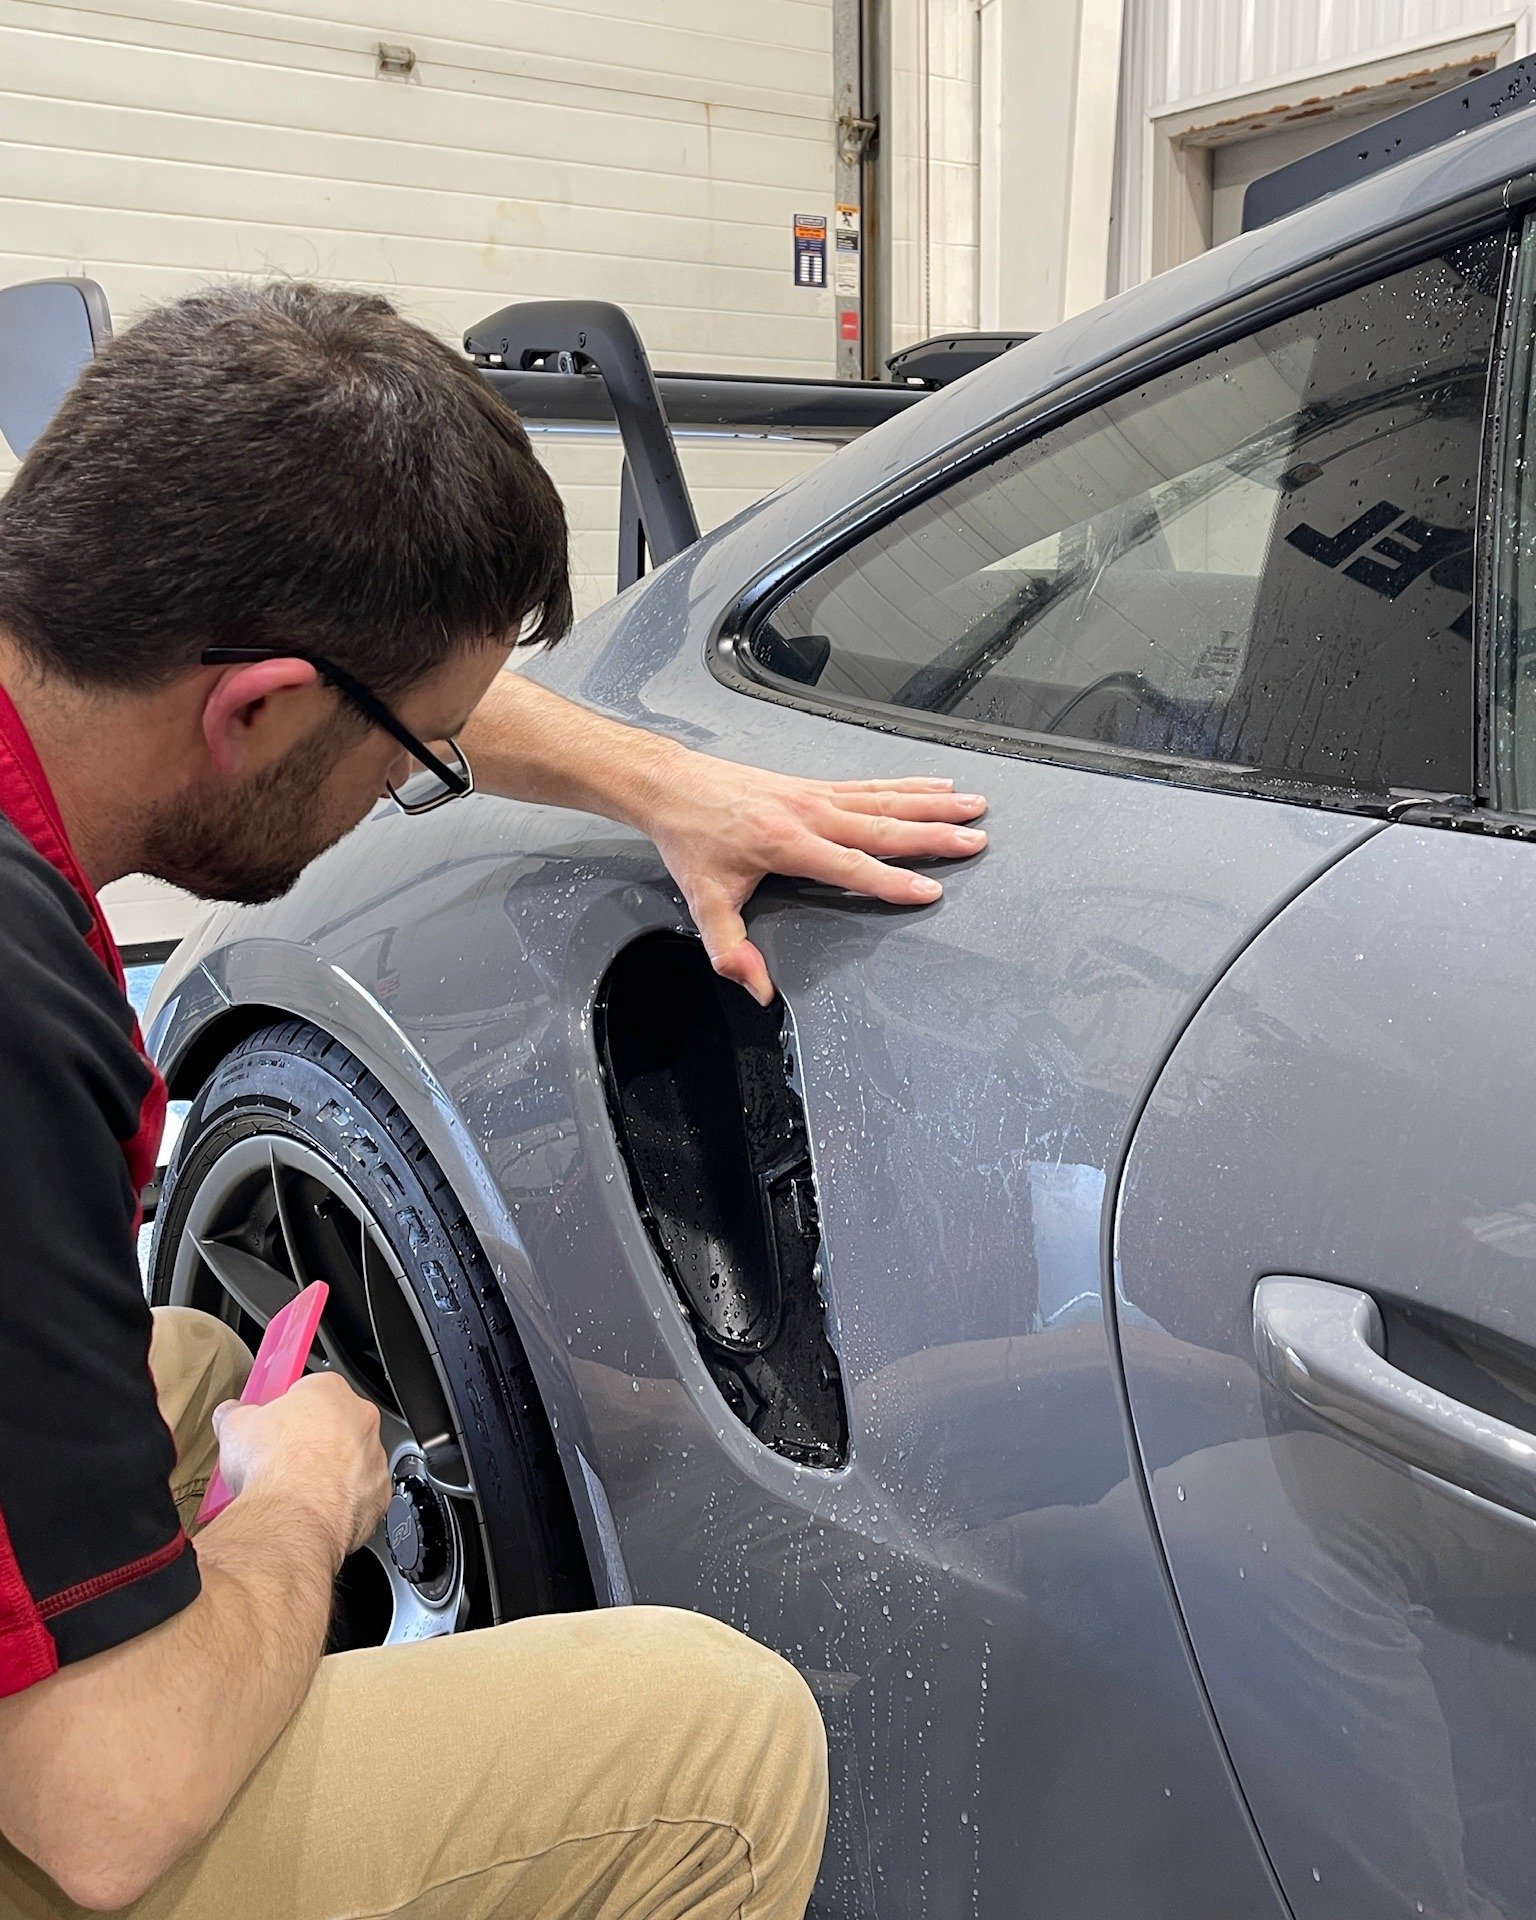 When it comes to paint protection film installation, the details really matter. Unprofessional installation can lead to visible edges, peeling, dirt under the film and other issues that take away from the aesthetics, durability and protection level t